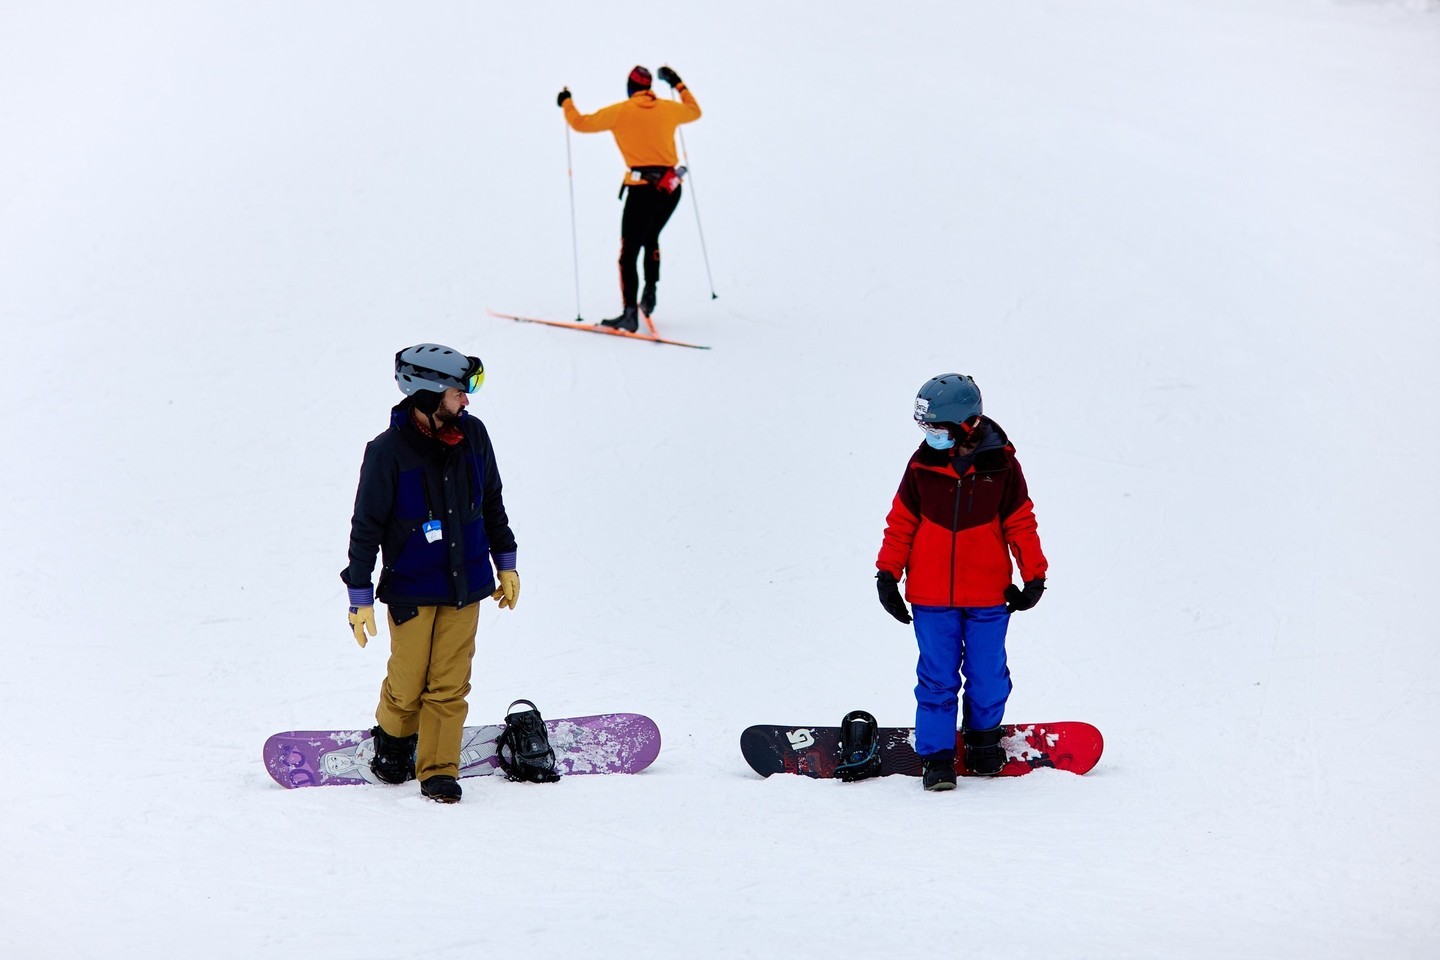 How are you spending your Sunday? ⛷️ If you're looking for ways to enjoy winter, look no further & spend the day at one of Minnesota's many ski resorts:⁠⁠⛷️ @buckhill⁠ @welchvillage⁠⛷️@lutsenmountains⁠ @giantsridge⁠⛷️ @aftonalps⁠ @spiritmtduluth⁠⁠📸 Show us how you are #LovingWhereWeLive!⁠⁠⁠ — from Instagram